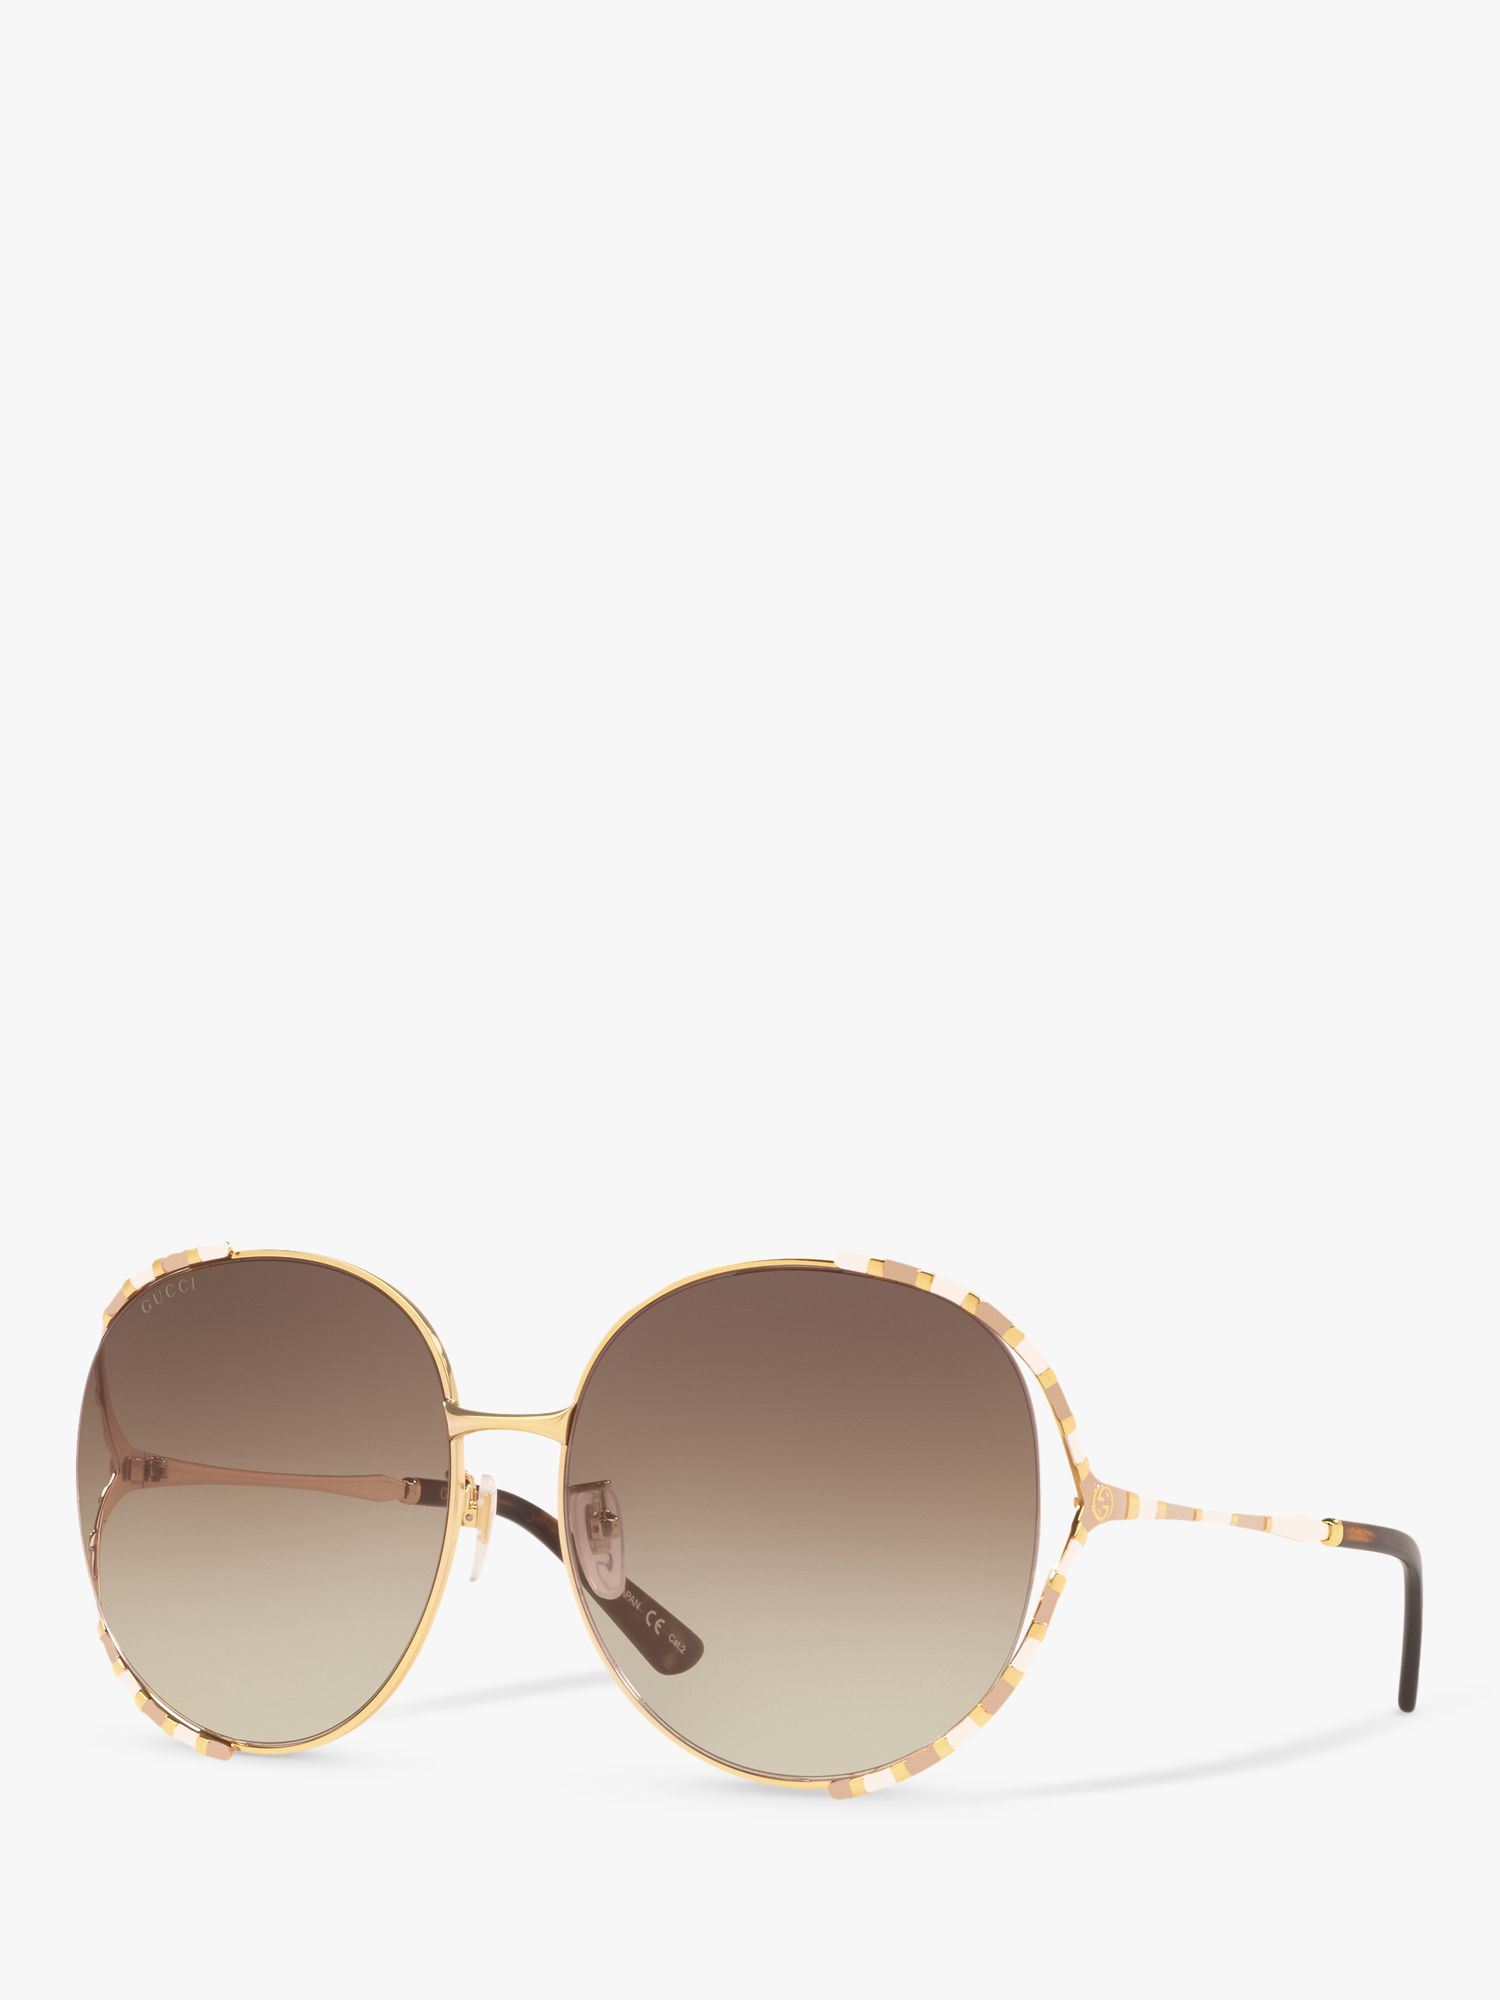 Gucci GG0595S Women's Oversized Oval Sunglasses, Gold/Brown Gradient